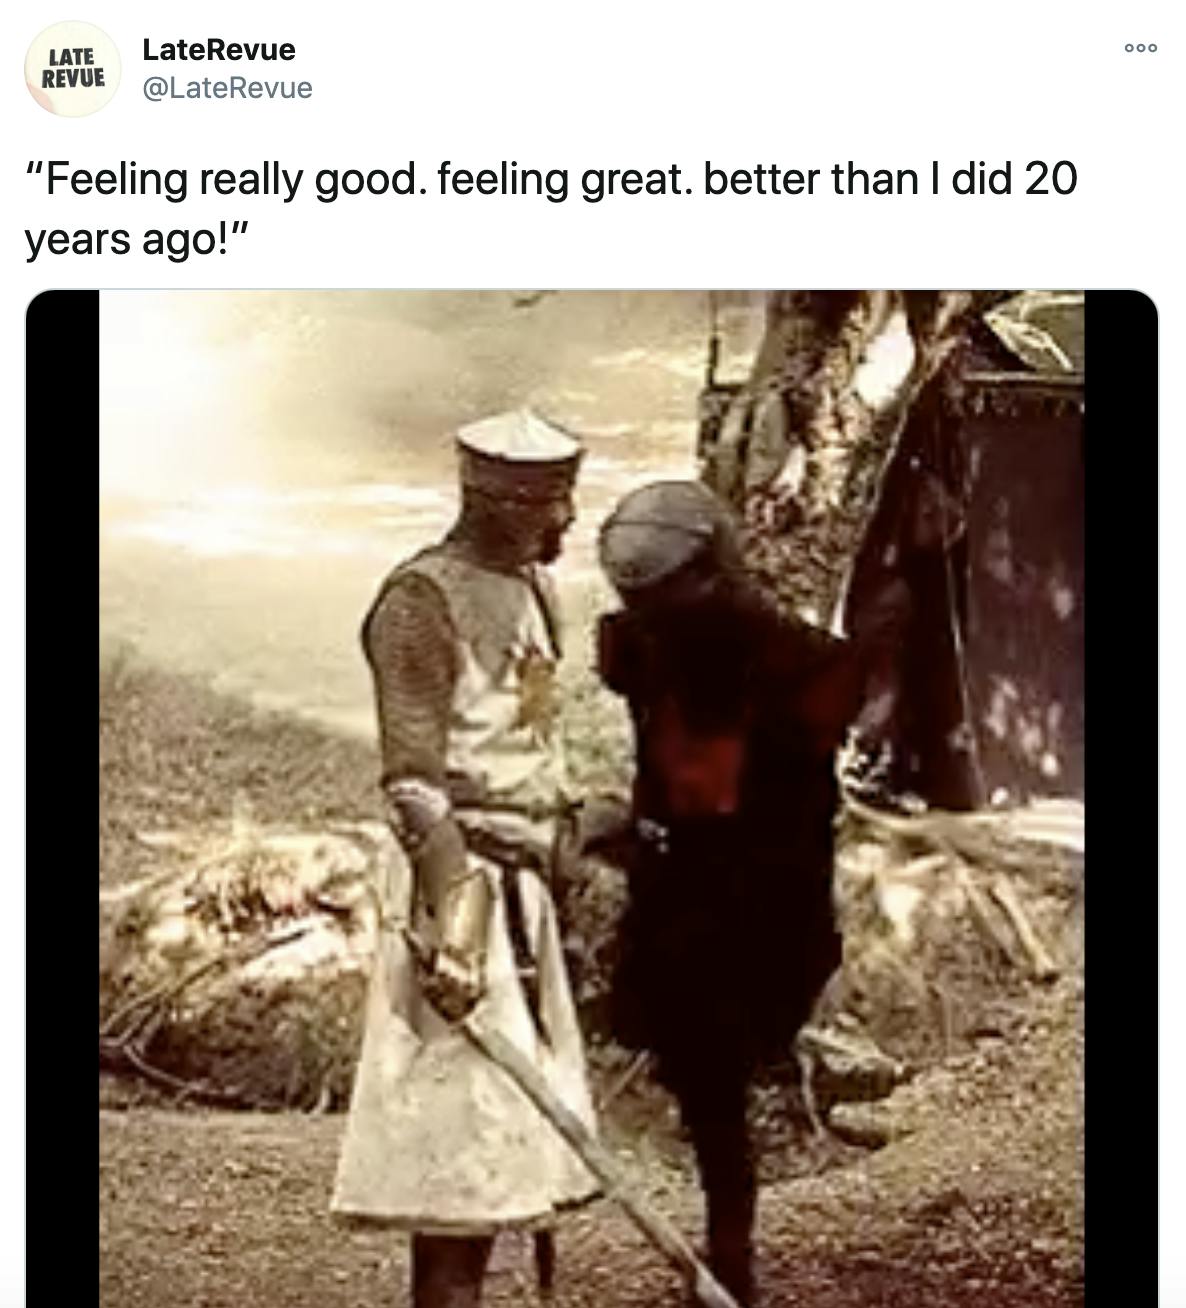 "“Feeling really good. feeling great. better than I did 20 years ago!”" gif of the Black Knight from Monty Python and the Holy Grail after he's lost both arms and one leg